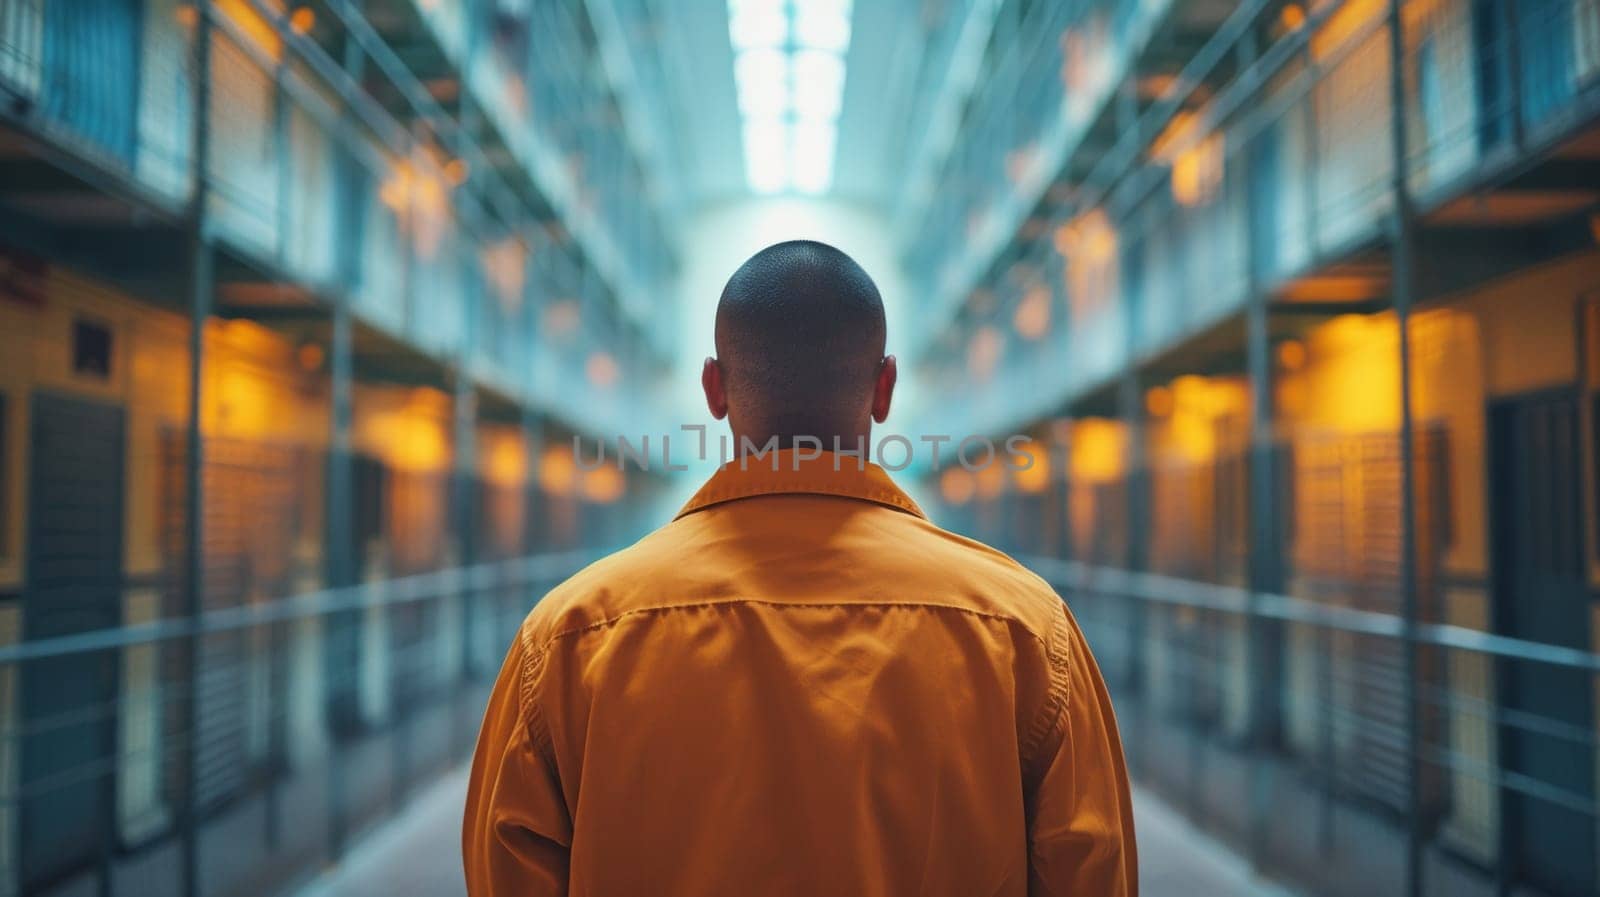 A man in orange jacket looking at camera from inside a jail cell, AI by starush